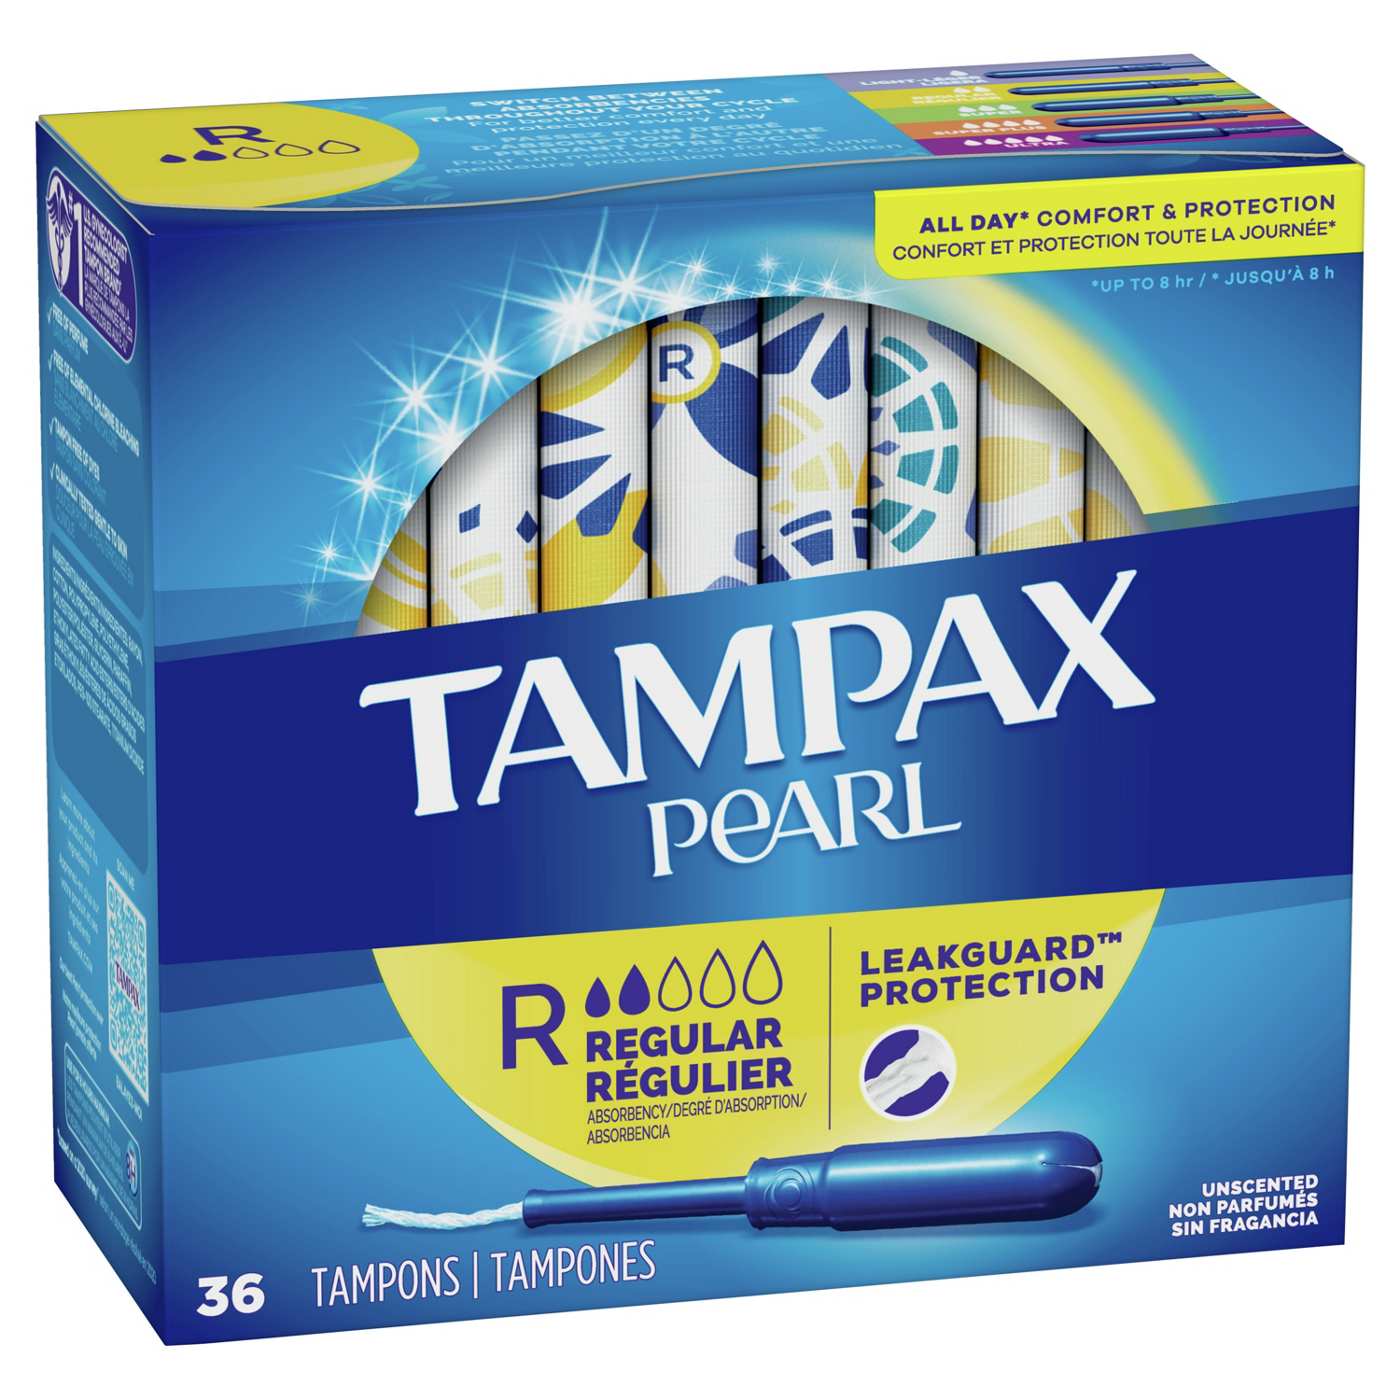 Tampax Pearl Tampons Regular Unscented; image 5 of 9